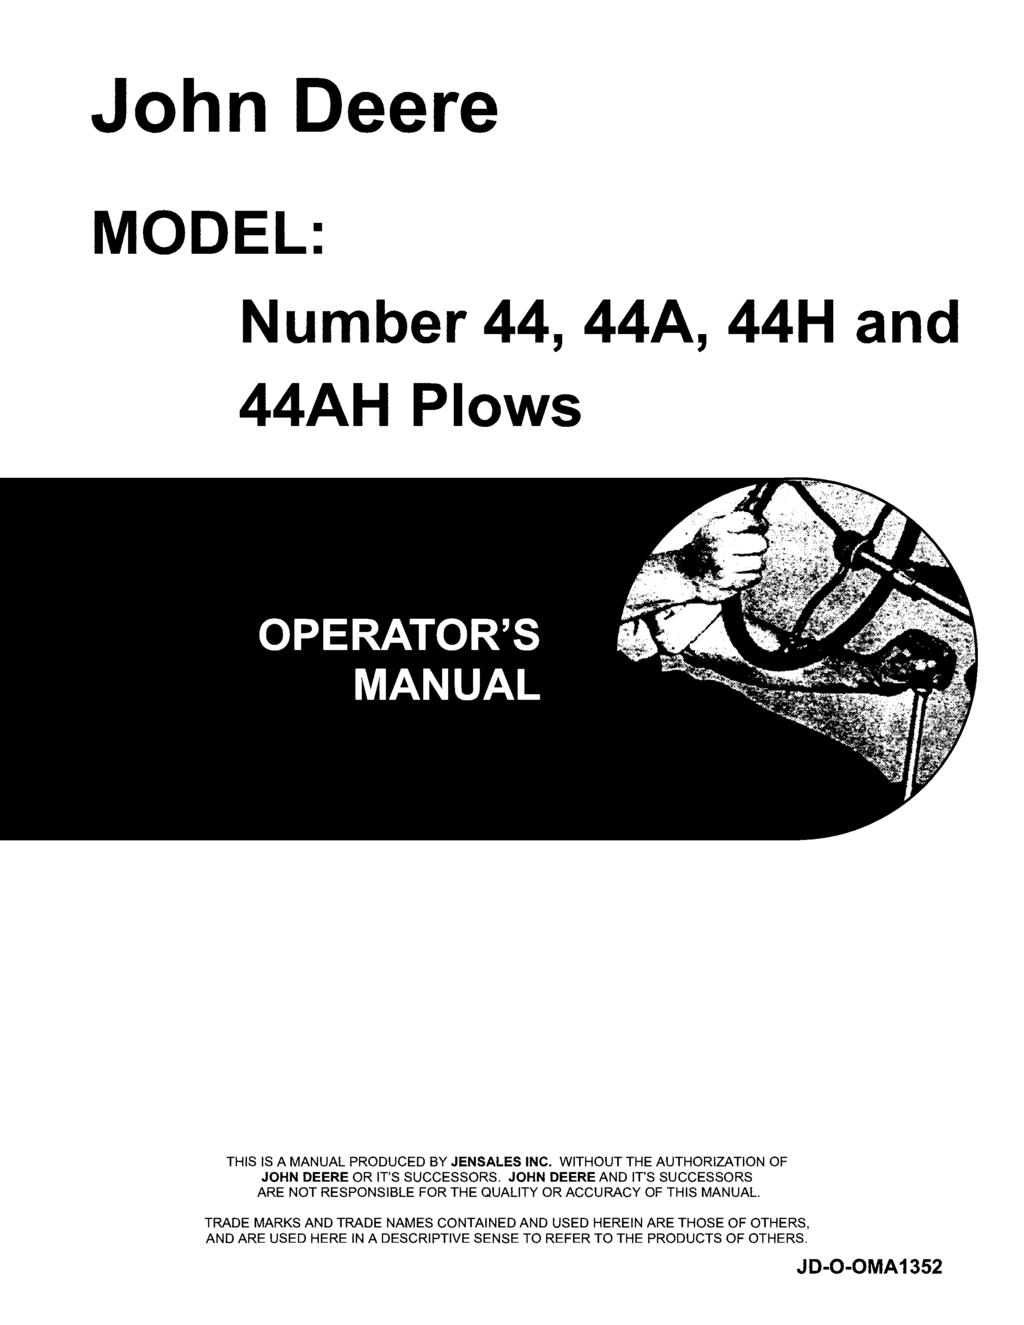 John Deere MODEL: Number 44, 44A, 44H and 44AH Plows THIS IS A MANUAL PRODUCED BY JENSALES INC. WITHOUT THE AUTHORIZATION OF JOHN DEERE OR IT'S SUCCESSORS.